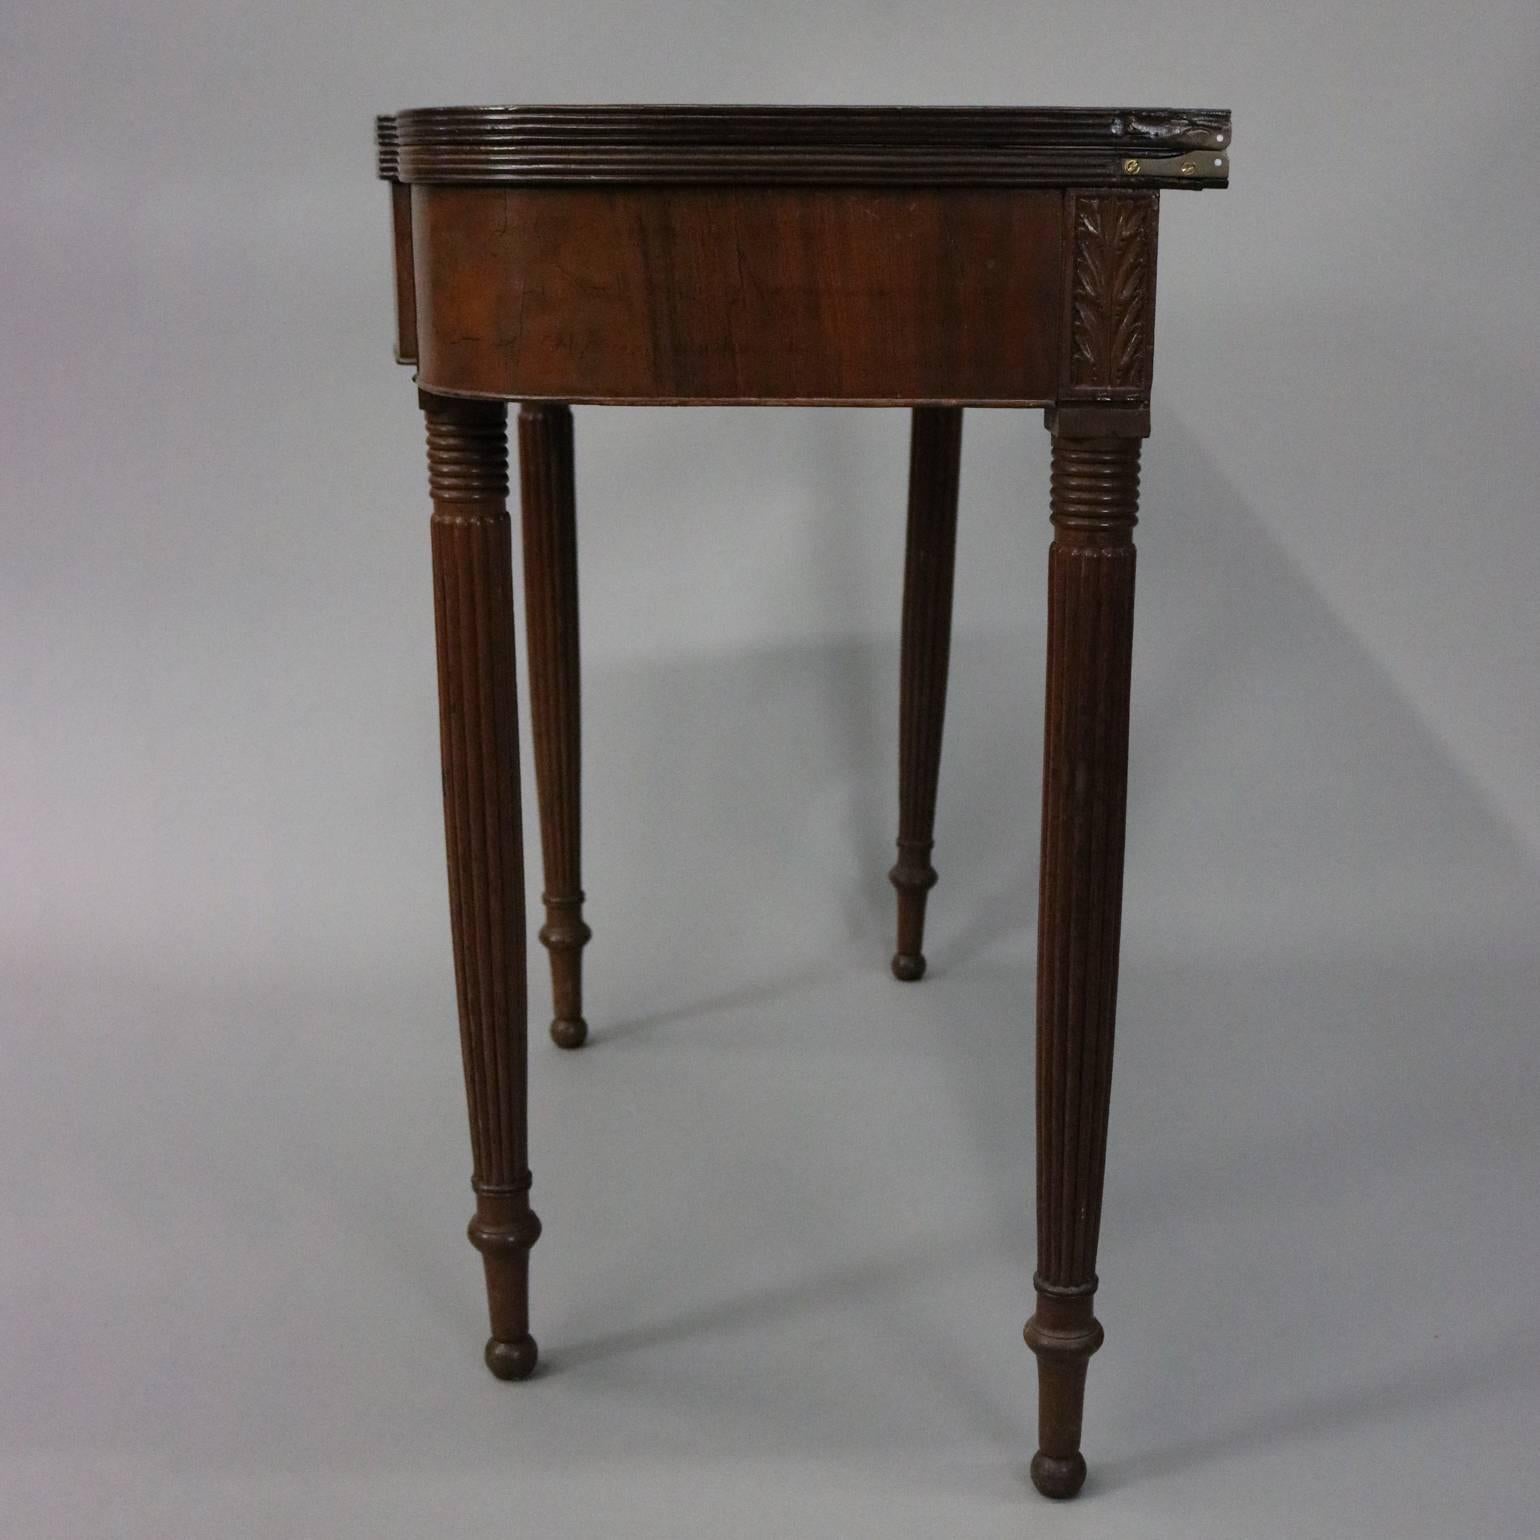 Hand-Carved Antique Sheraton Carved Mahogany Game Table, Acanthus Decorated, circa 1830